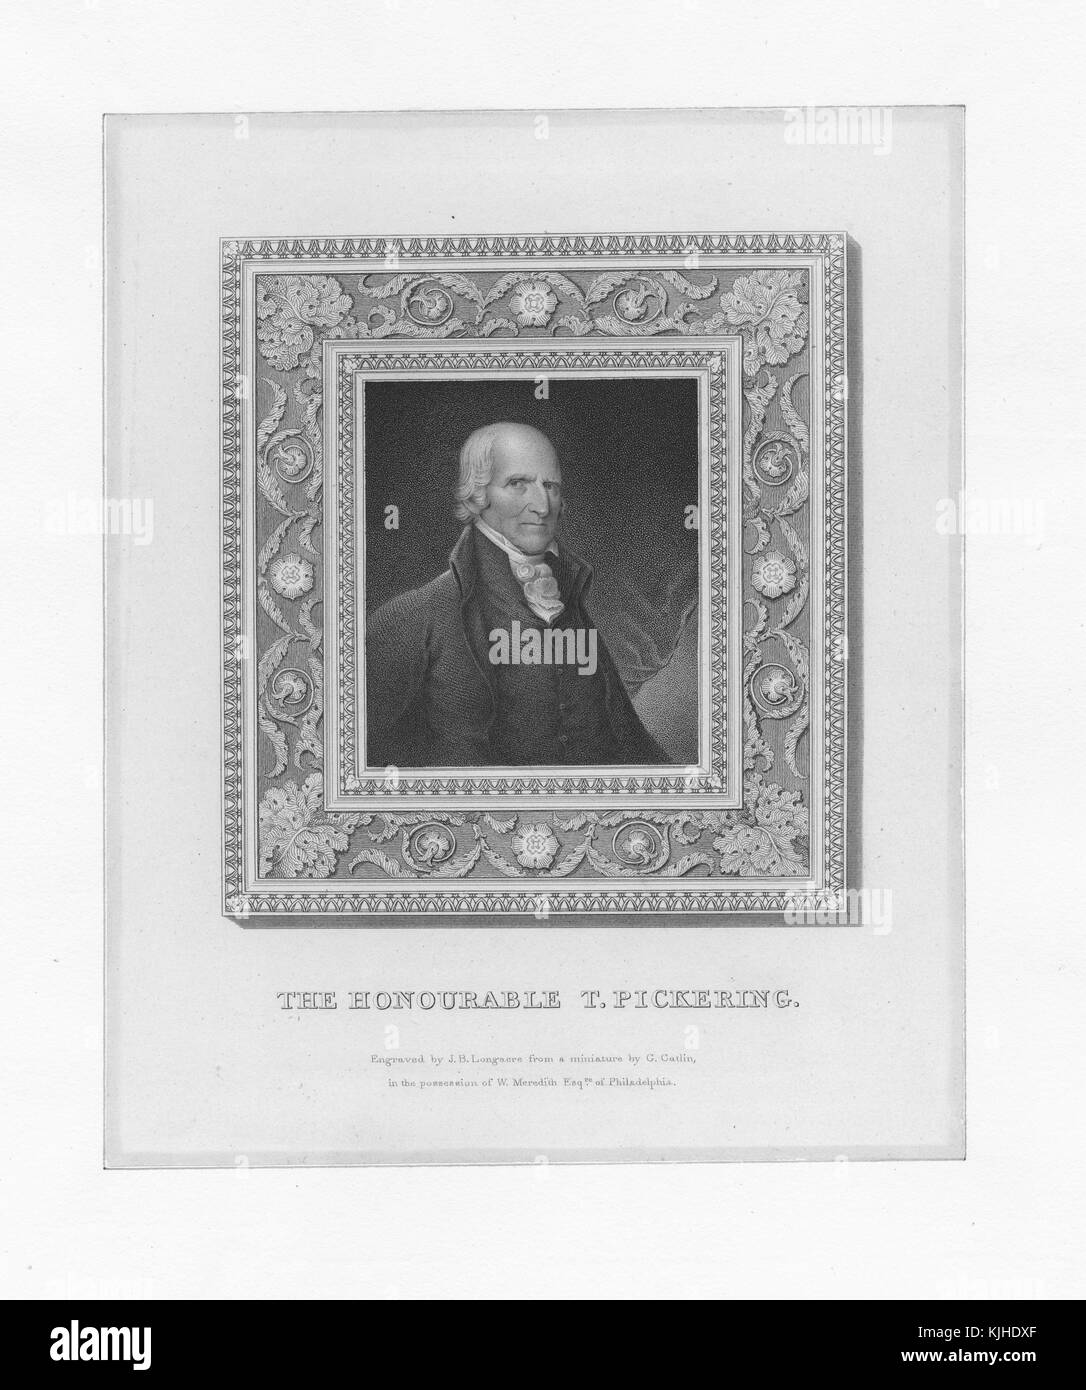 Stipple engraving portrait of Timothy Pickering, third United States Secretary of State, serving in that office from 1795 to 1800 under Presidents George Washington and John Adams, featured within an ornate frame, Philadelphia, Pennsylvania, 1880. From the New York Public Library. Stock Photo